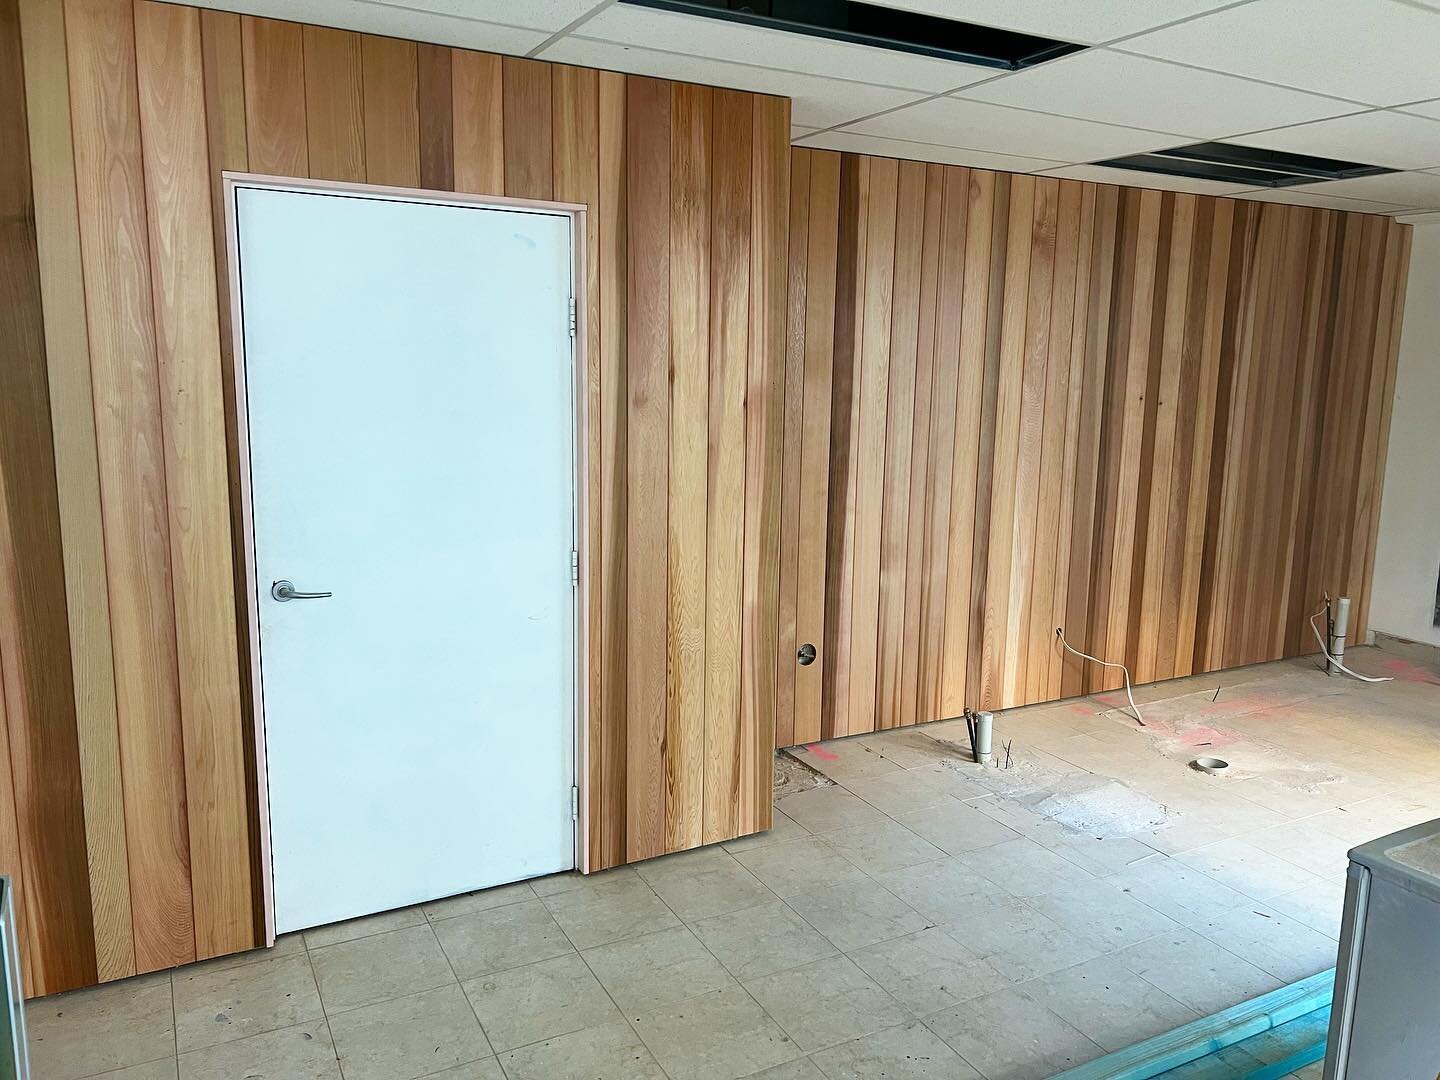 Our recently completed project in Camperdown! Our client wanted cedar lining boards installed to a back feature wall for a new commercial space. 

Swipe through to see the before and after shots! 

Contact us today for any of your upcoming projects o